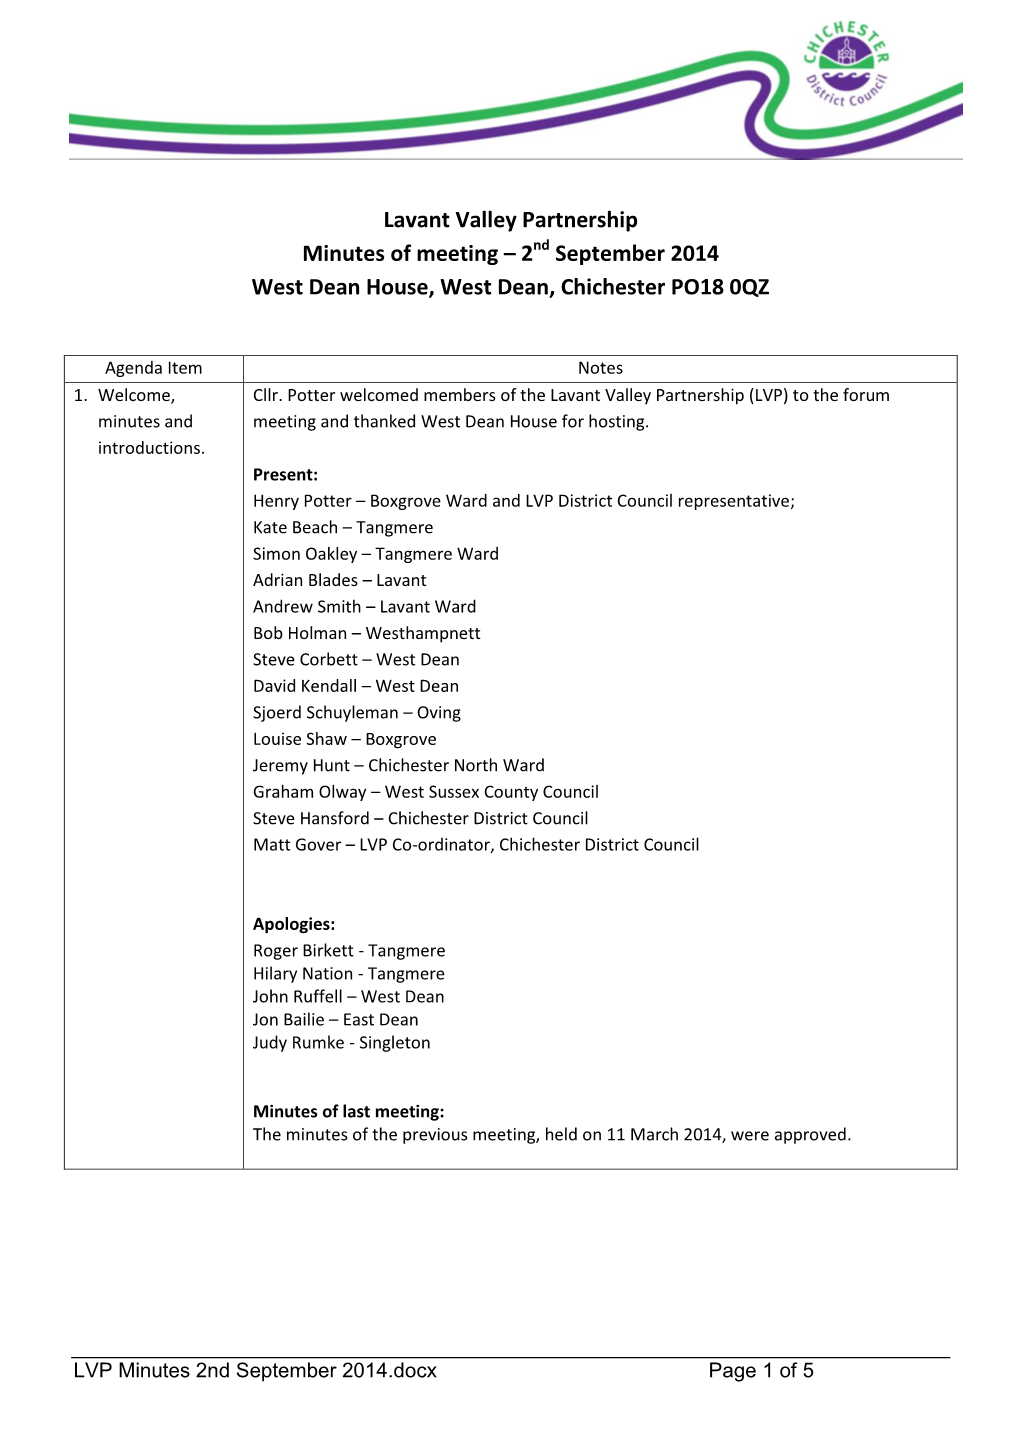 Lavant Valley Partnership Minutes of Meeting – 2Nd September 2014 West Dean House, West Dean, Chichester PO18 0QZ